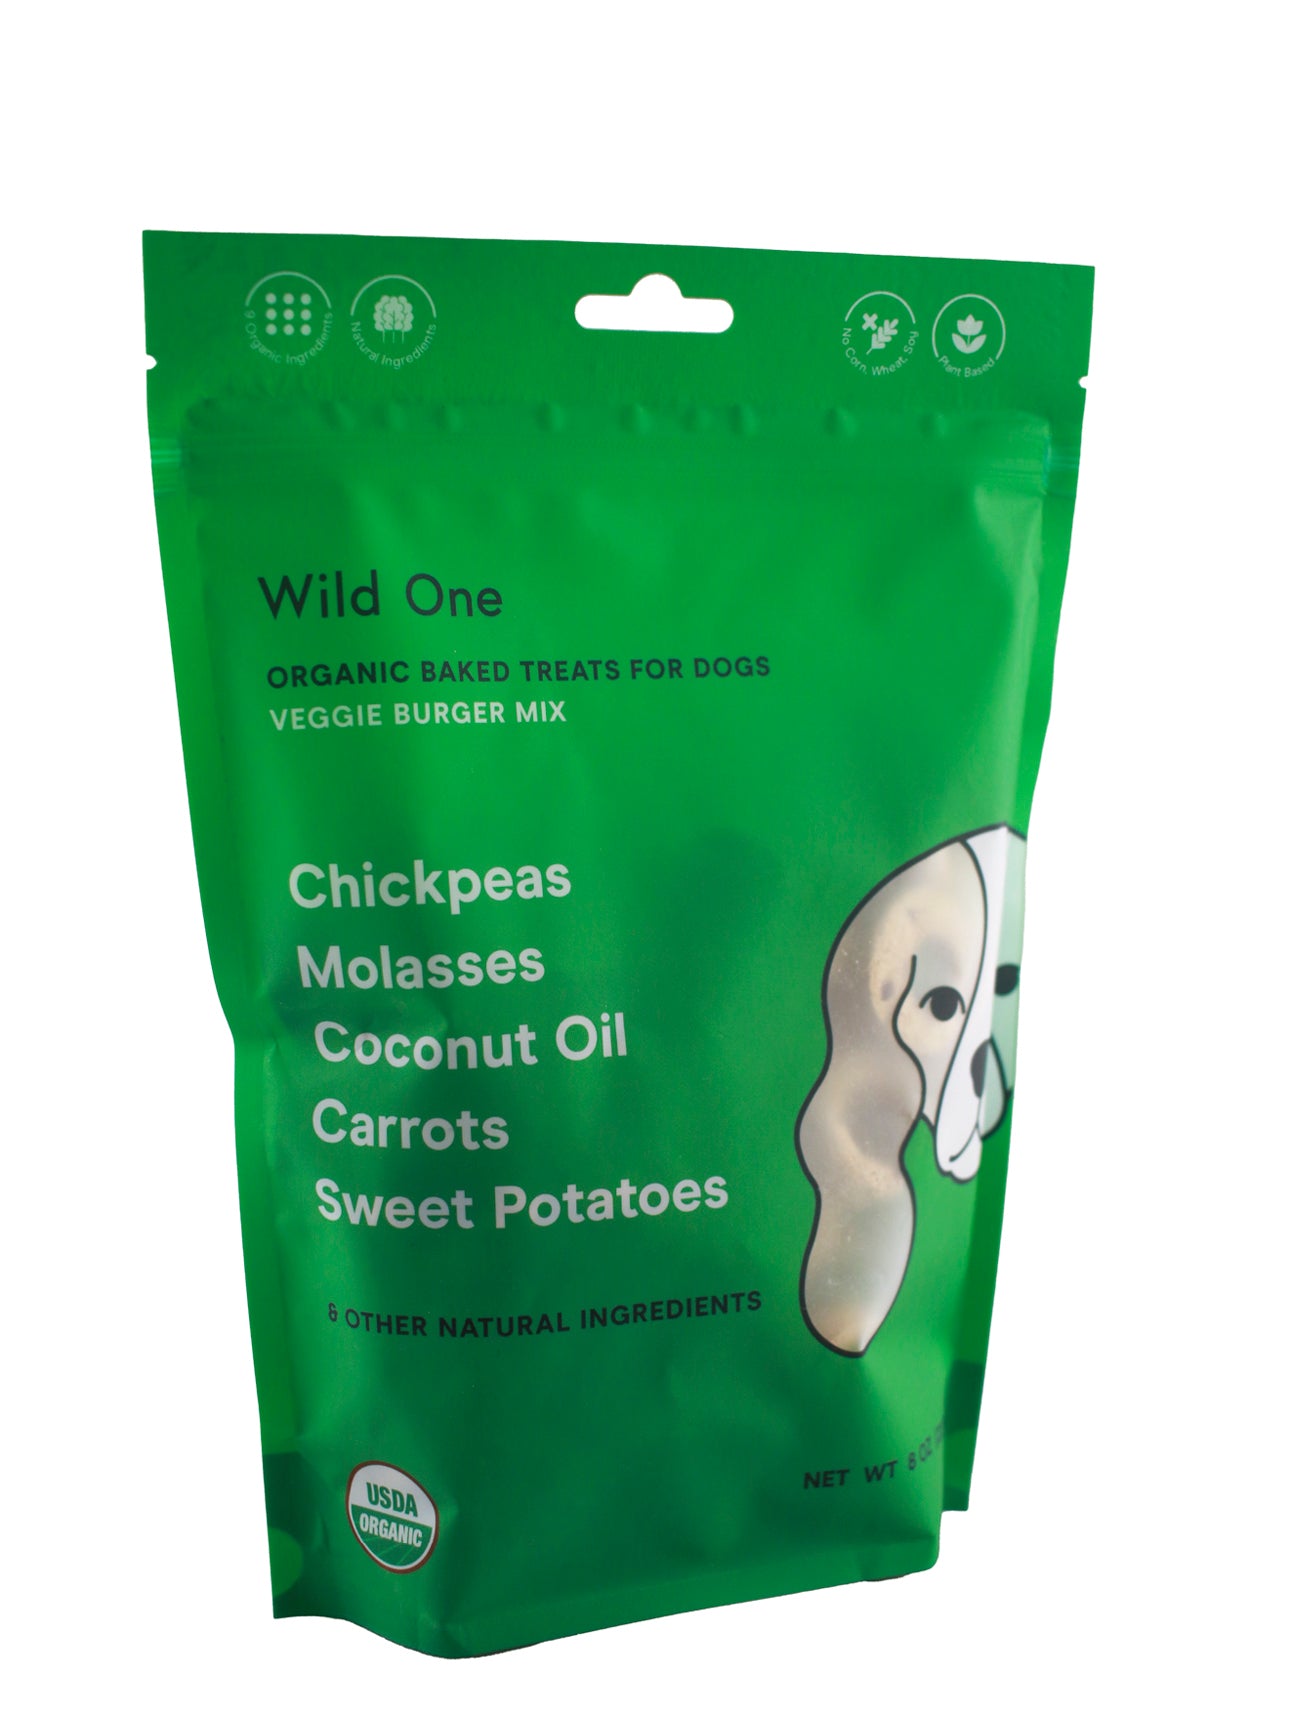 Wild One Organic Baked Treats for Dogs